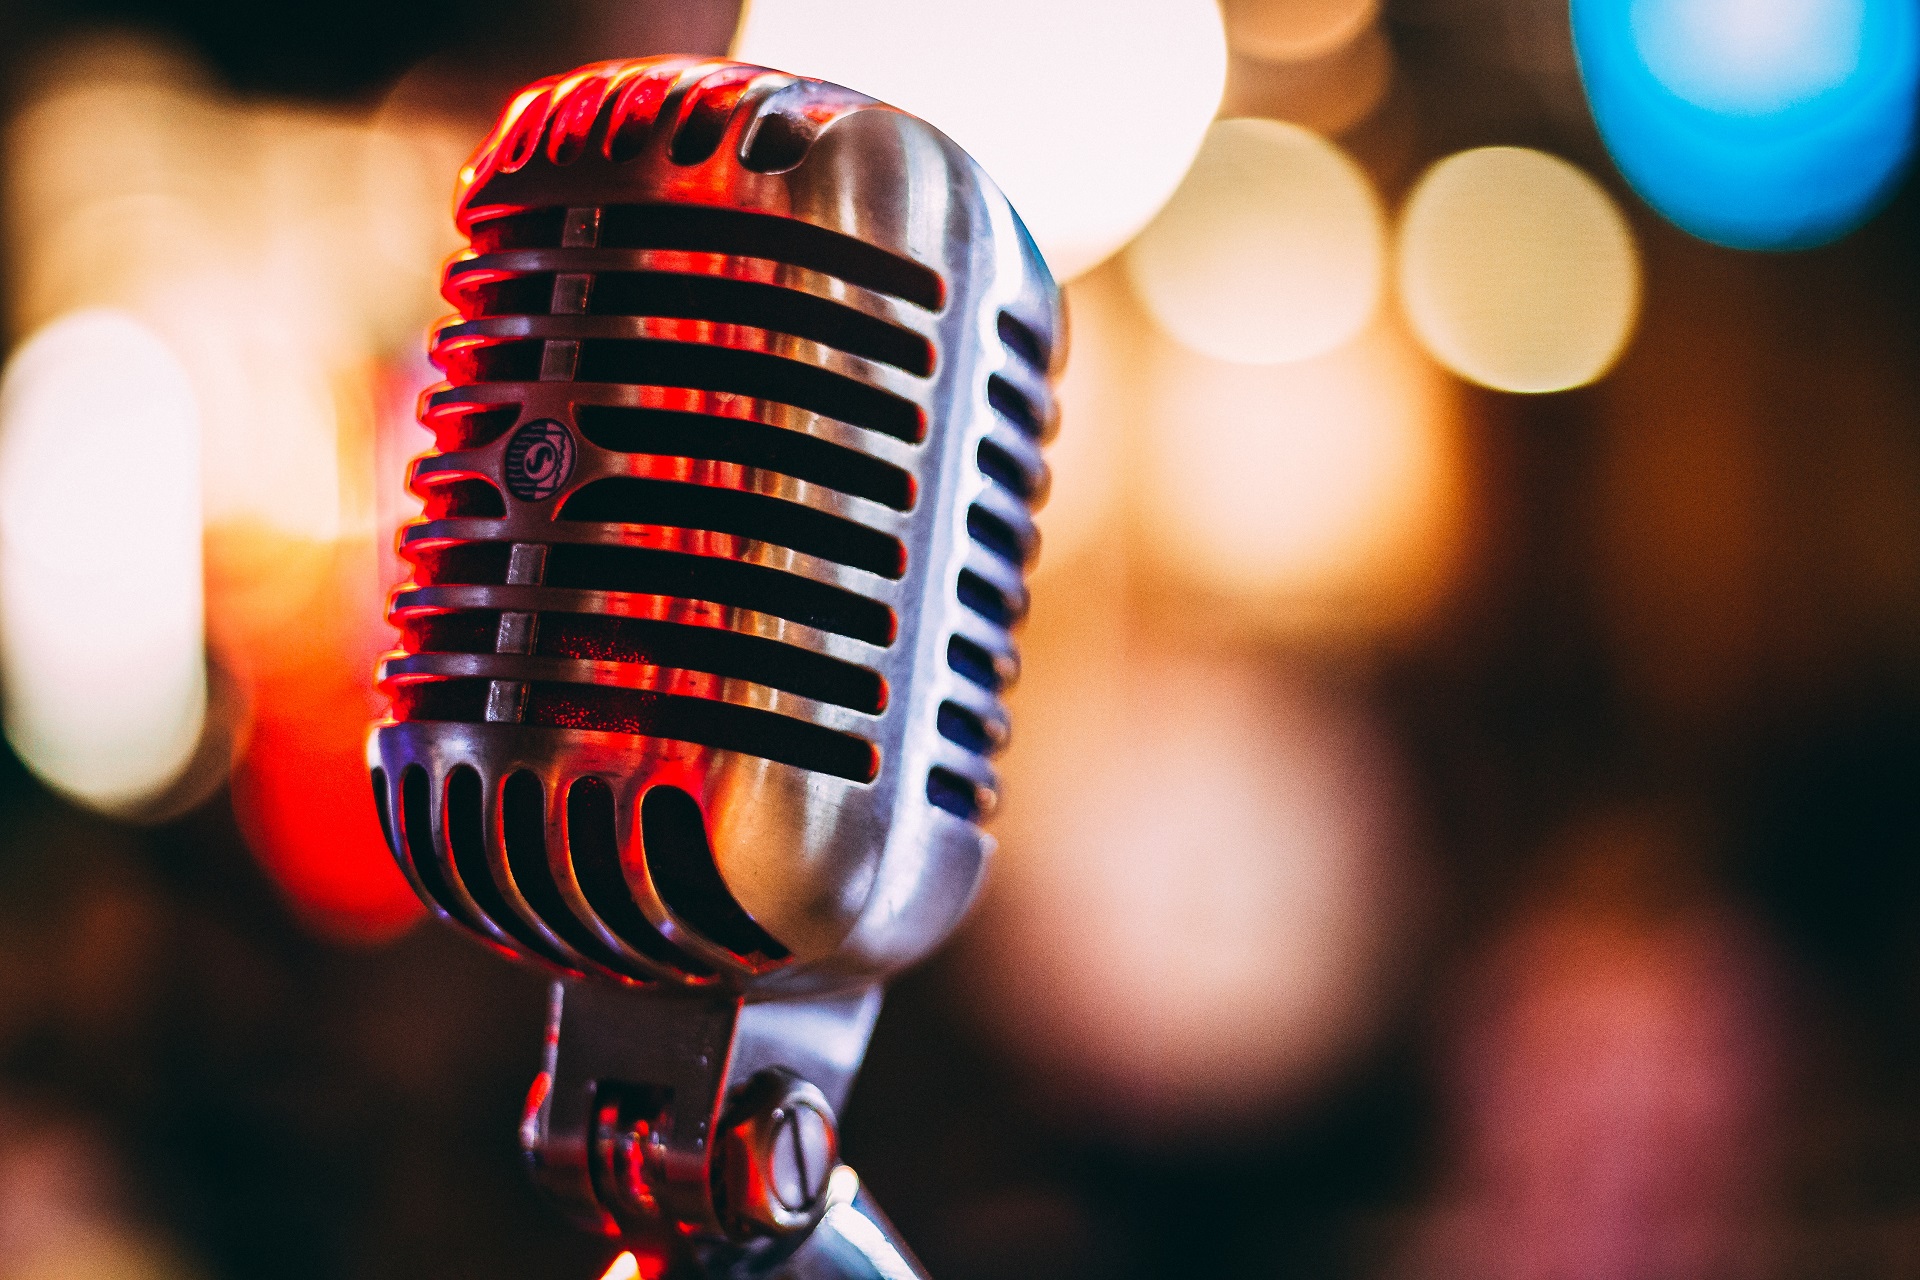 Know what type of microphone you are using. 